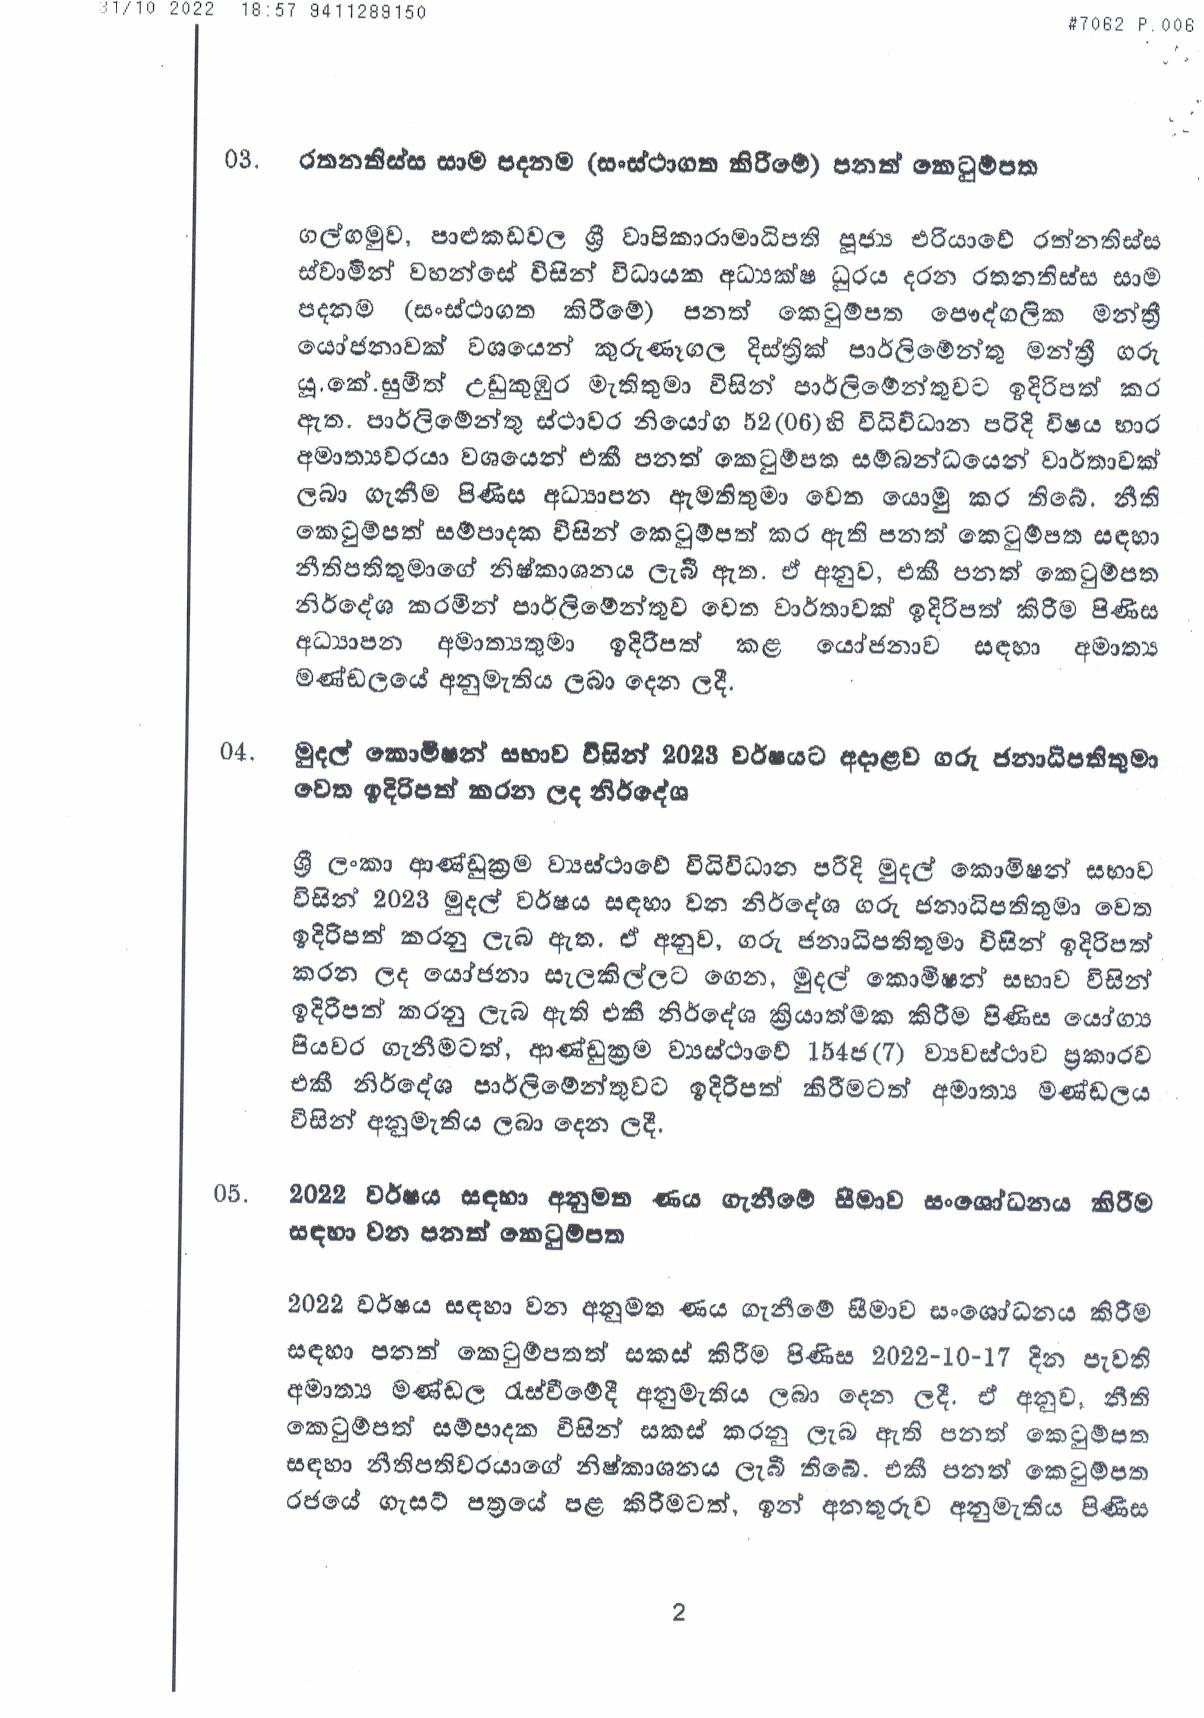 Cabinet Decisions on 31.10.2022 page 002